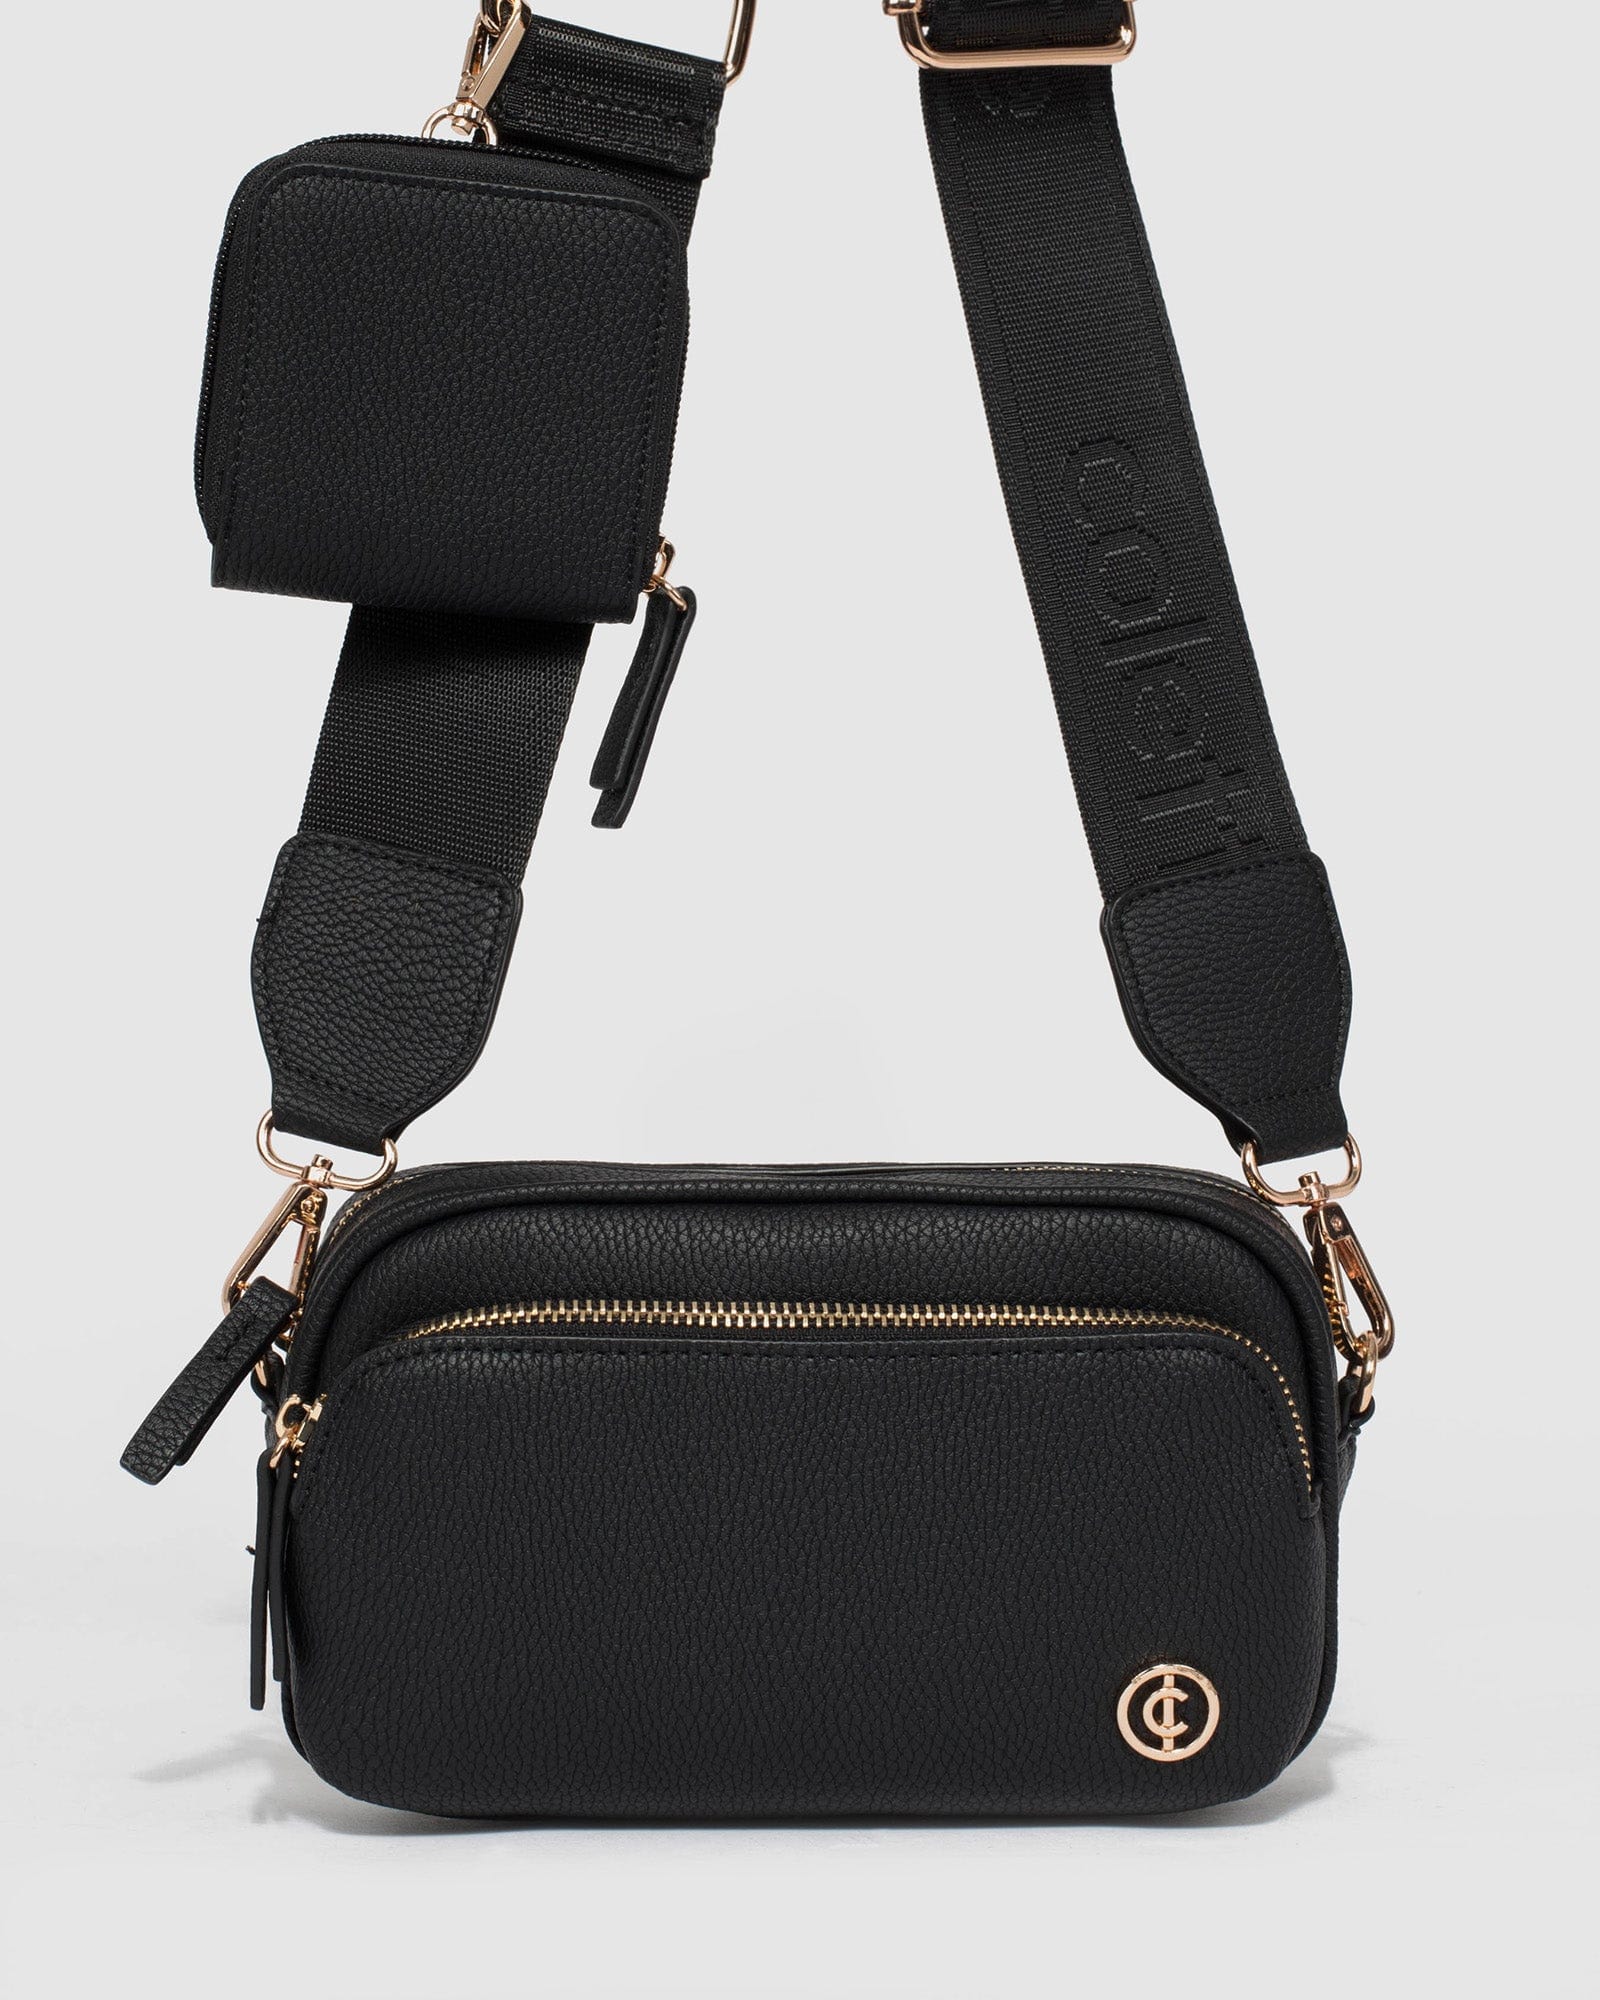 Buy Black Vegan Leather Crossbody Purse for Women. Chic Soft Faux Leather  Crossbody Bag With Exterior Pocket, Zipper and Wide Shoulder Strap. Online  in India - Etsy